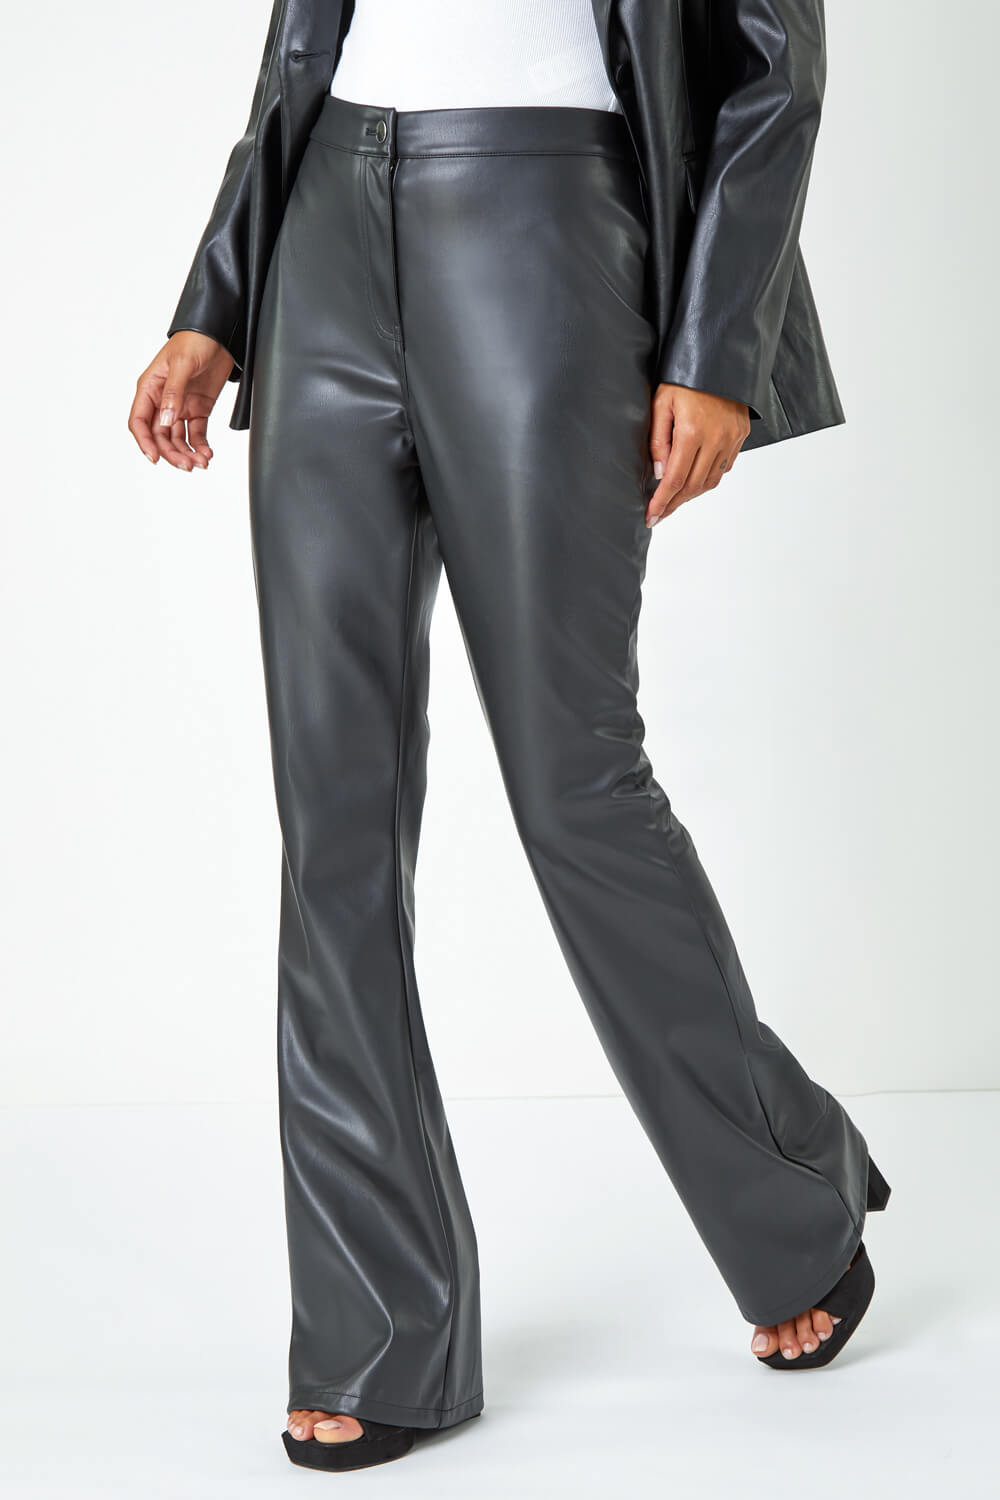 Black Faux Leather Bootcut Stretch Trousers, Image 1 of 6